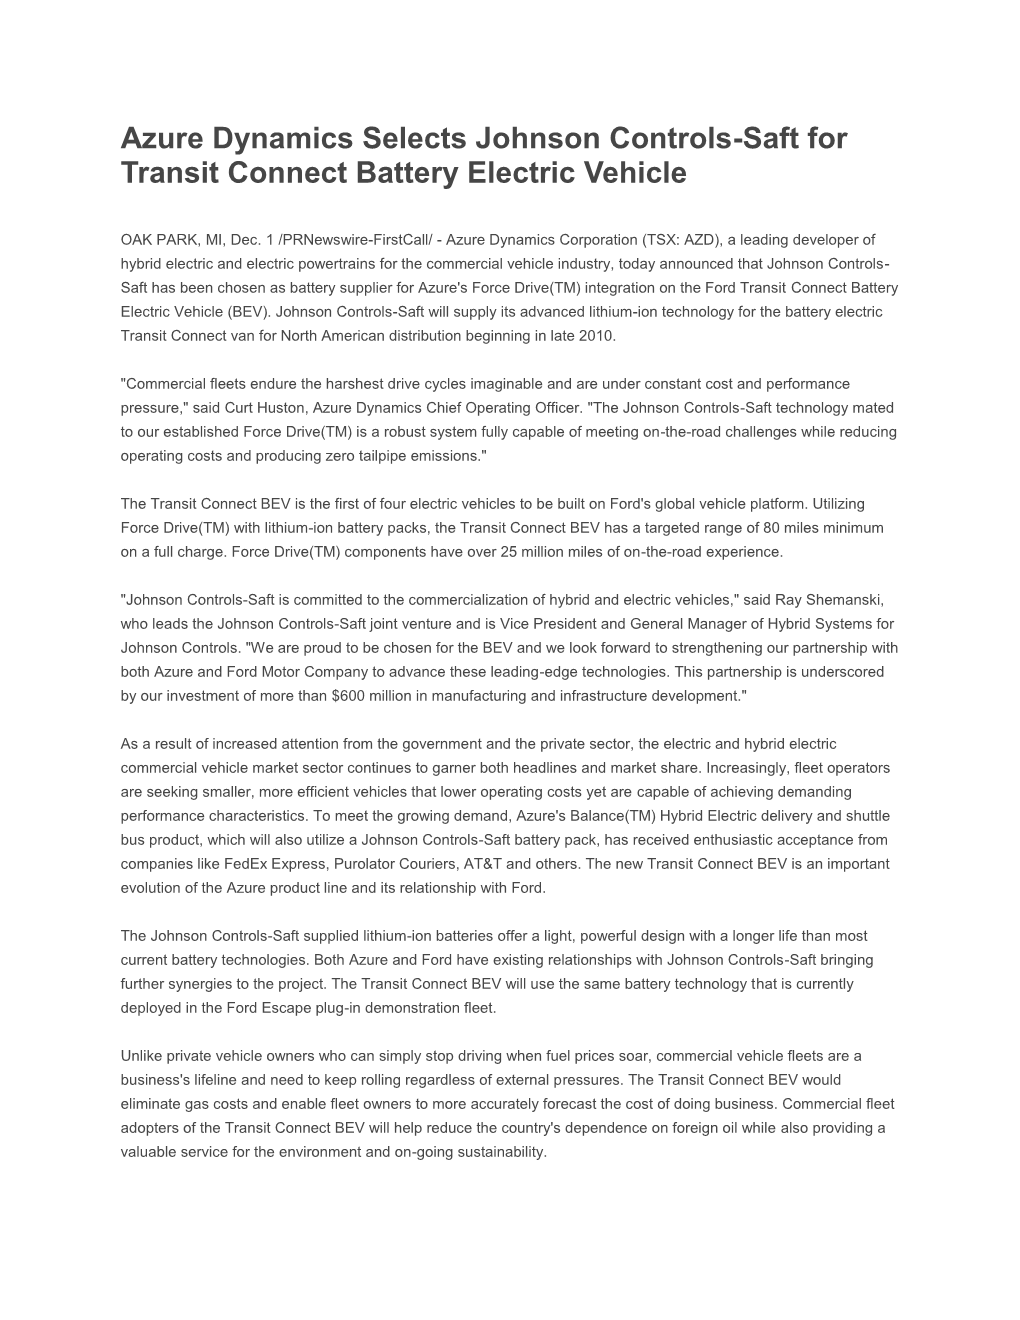 Azure Dynamics Selects Johnson Controls-Saft for Transit Connect Battery Electric Vehicle